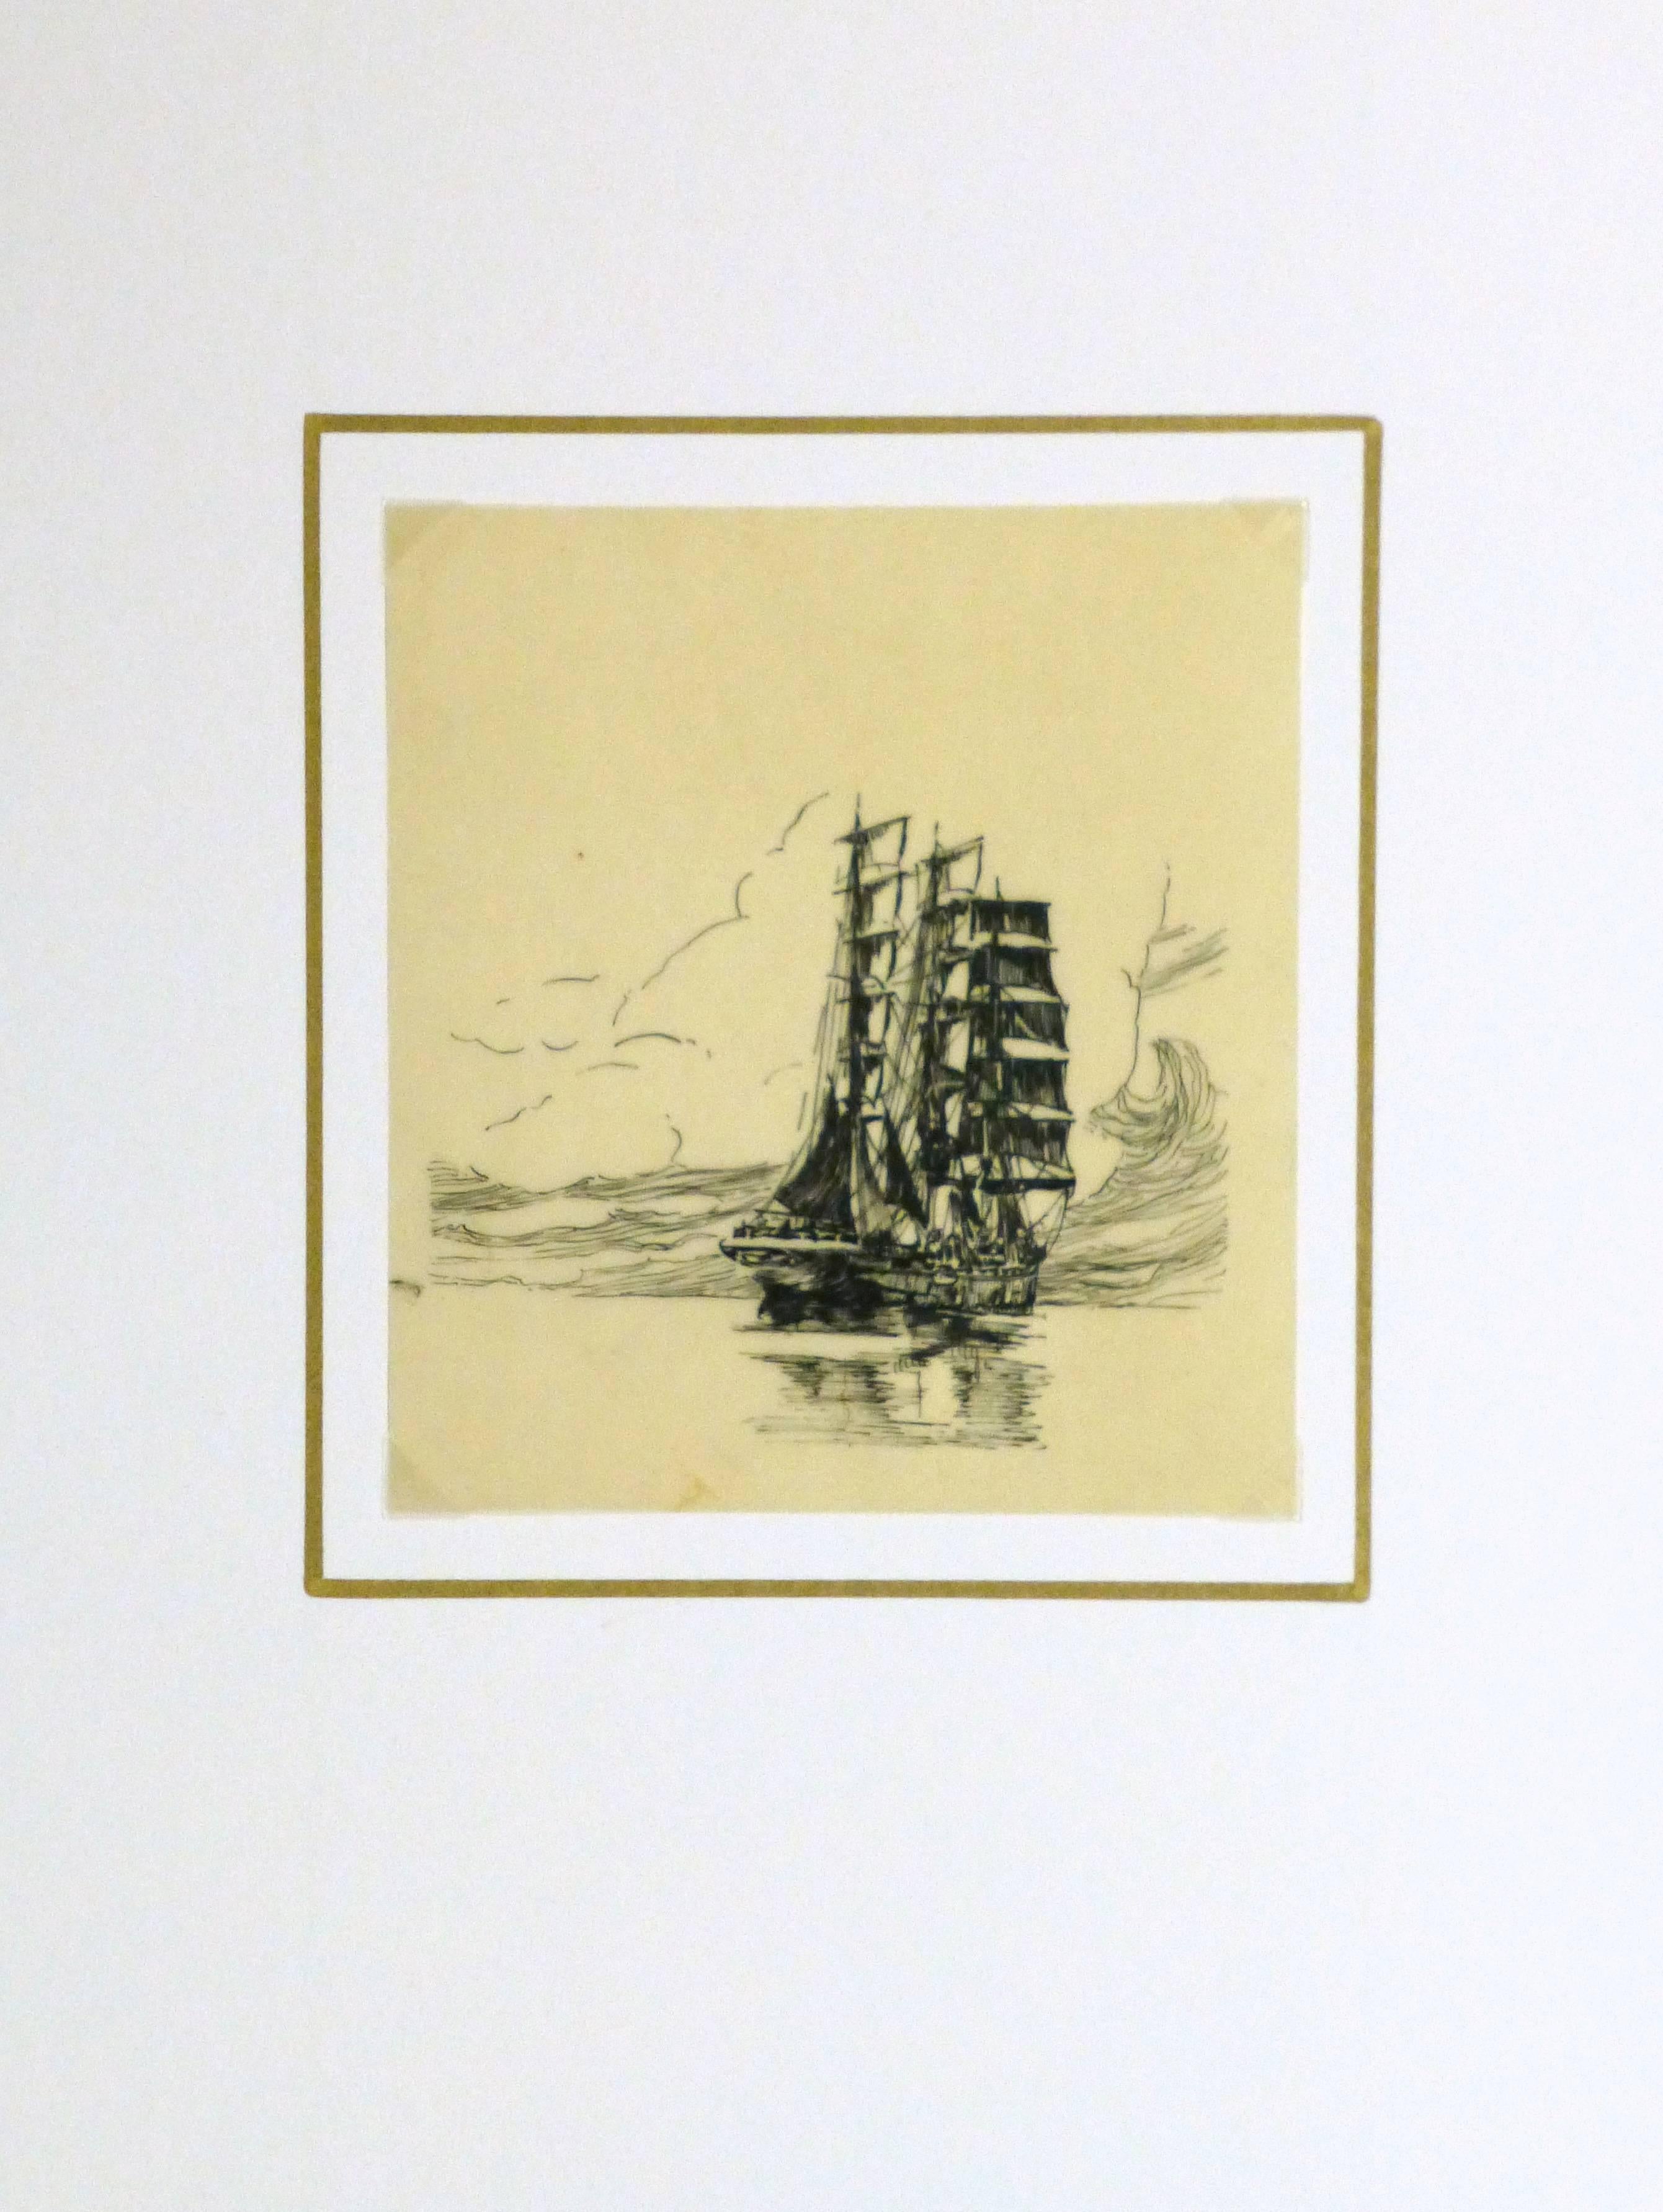 Tranquil pen and ink sketch on transfer paper of a large ship afloat in a glassy sea, circa 1920.

Original artwork on paper displayed on a white mat with a gold border. Archival plastic sleeve and Certificate of Authenticity included. Artwork,